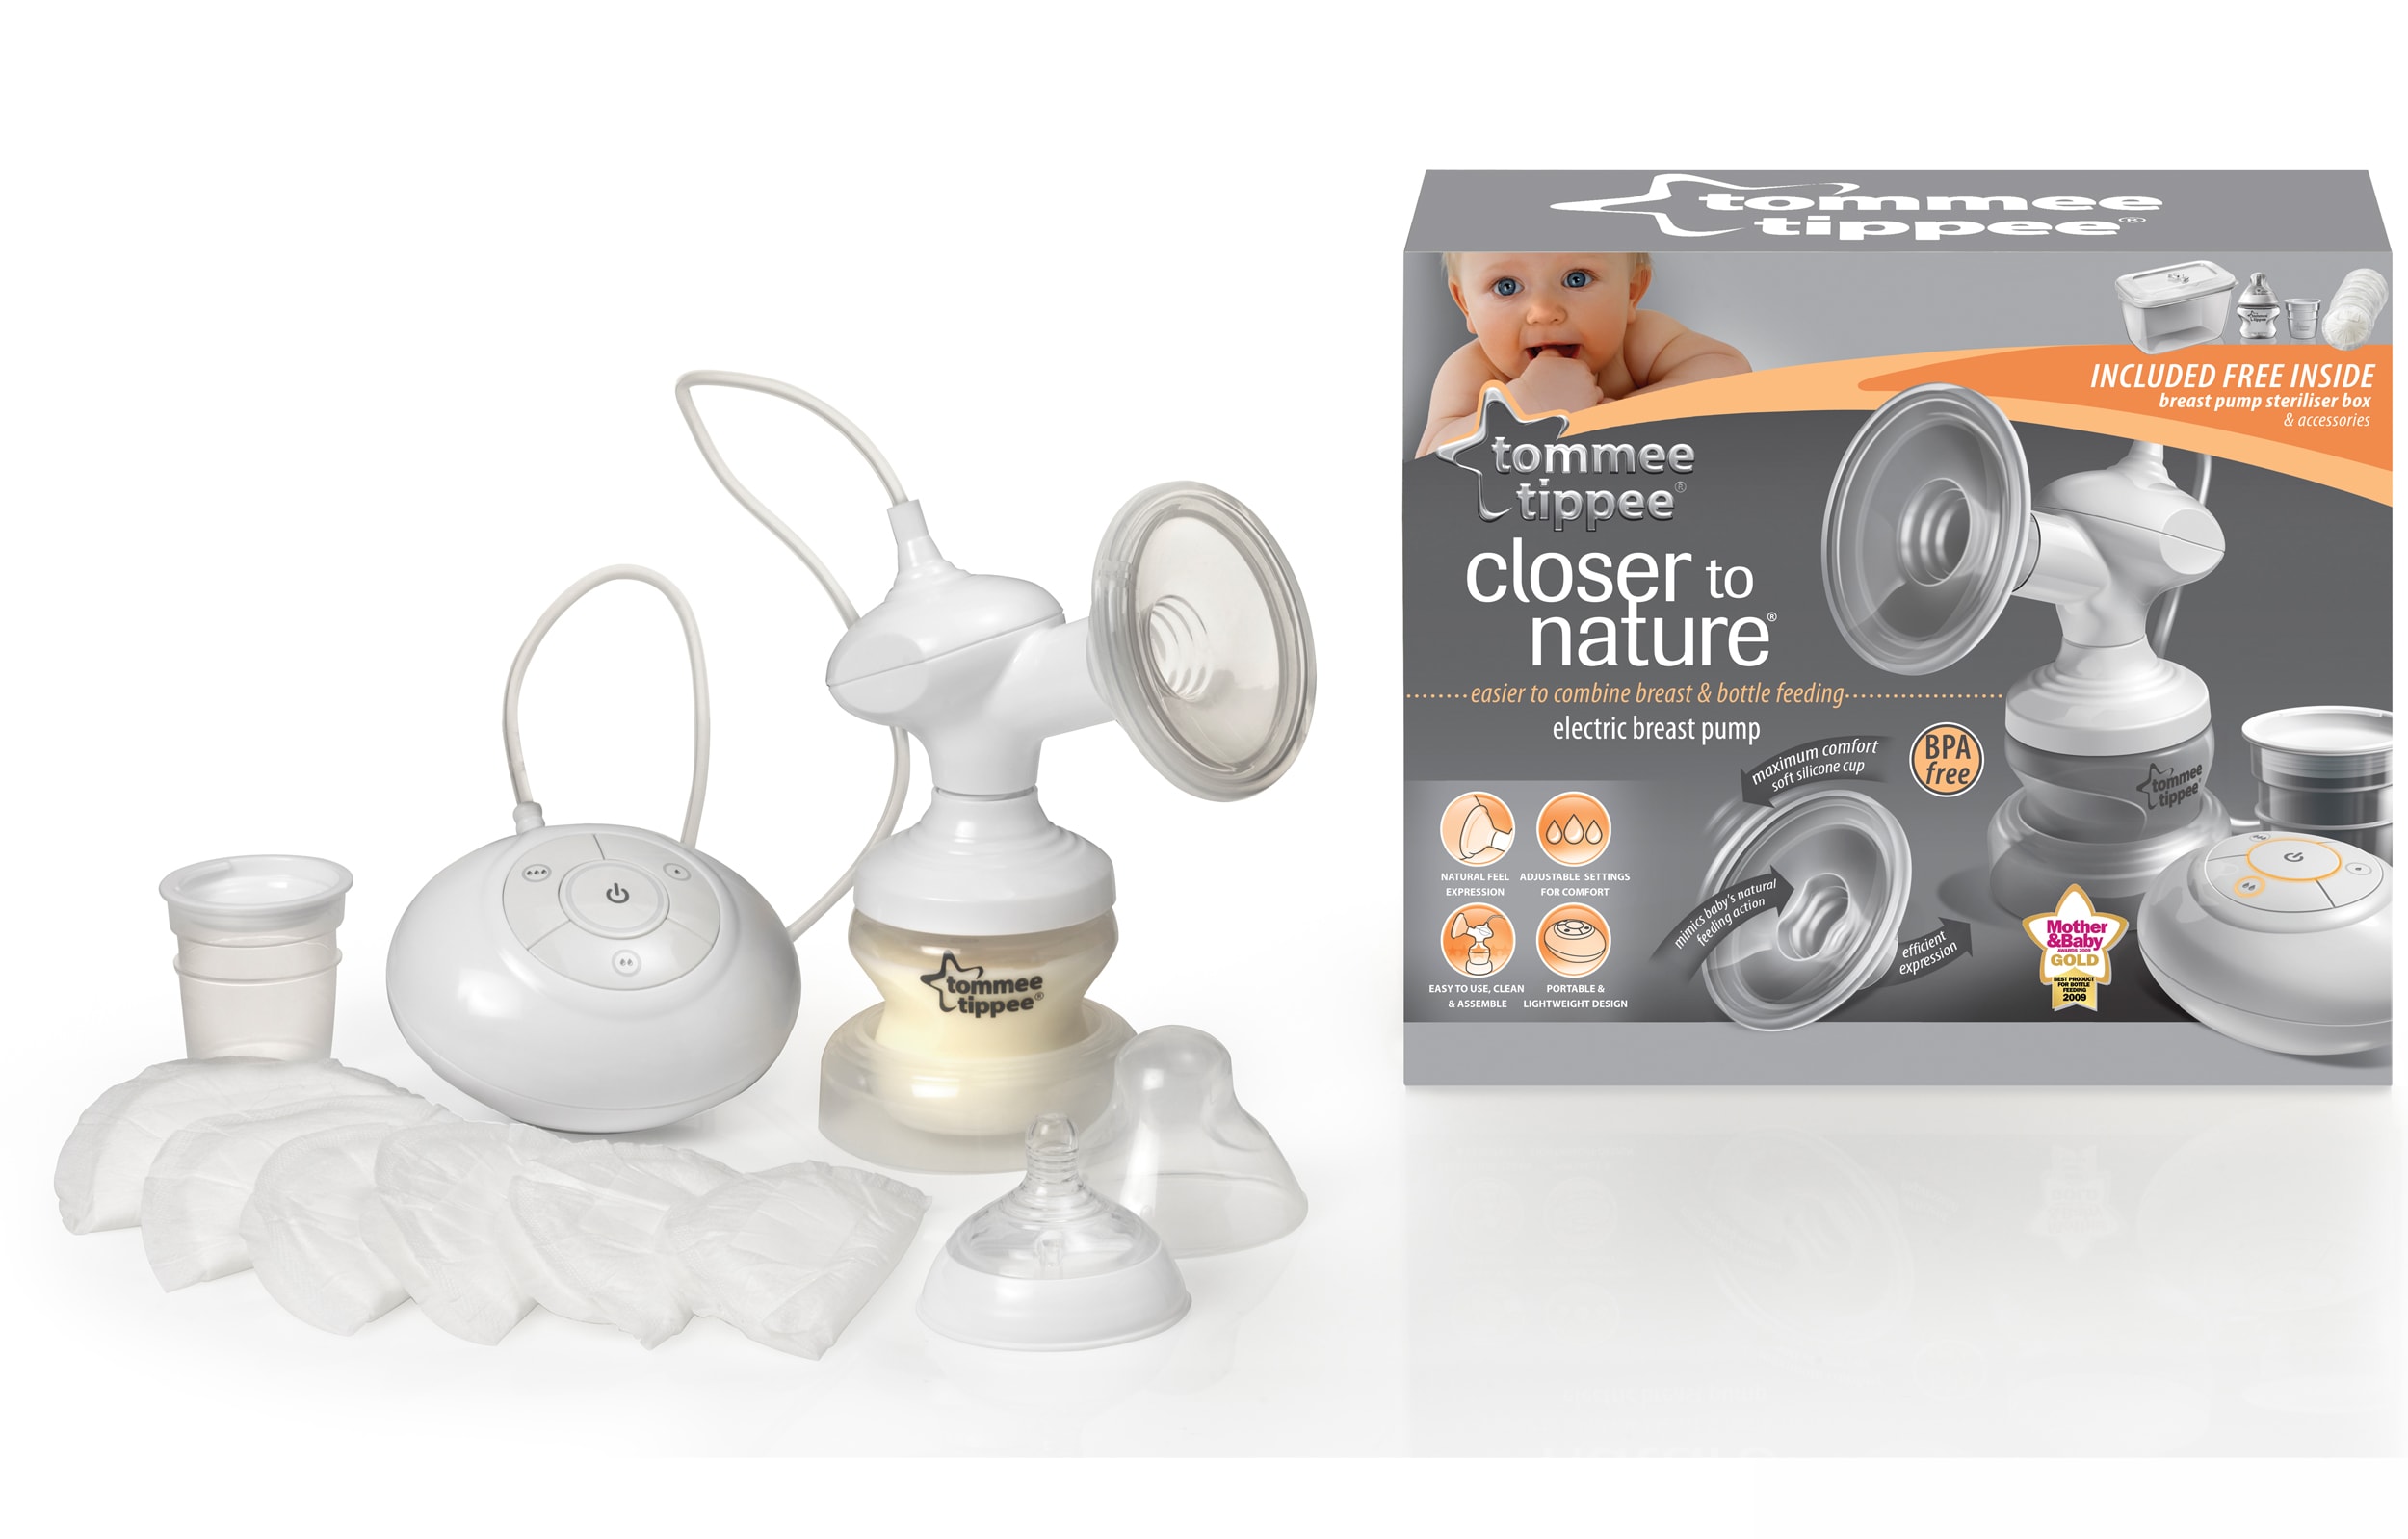 TOMMEE TIPPEE COLSE TO NATURE TIRE LAIT EN SILICONE